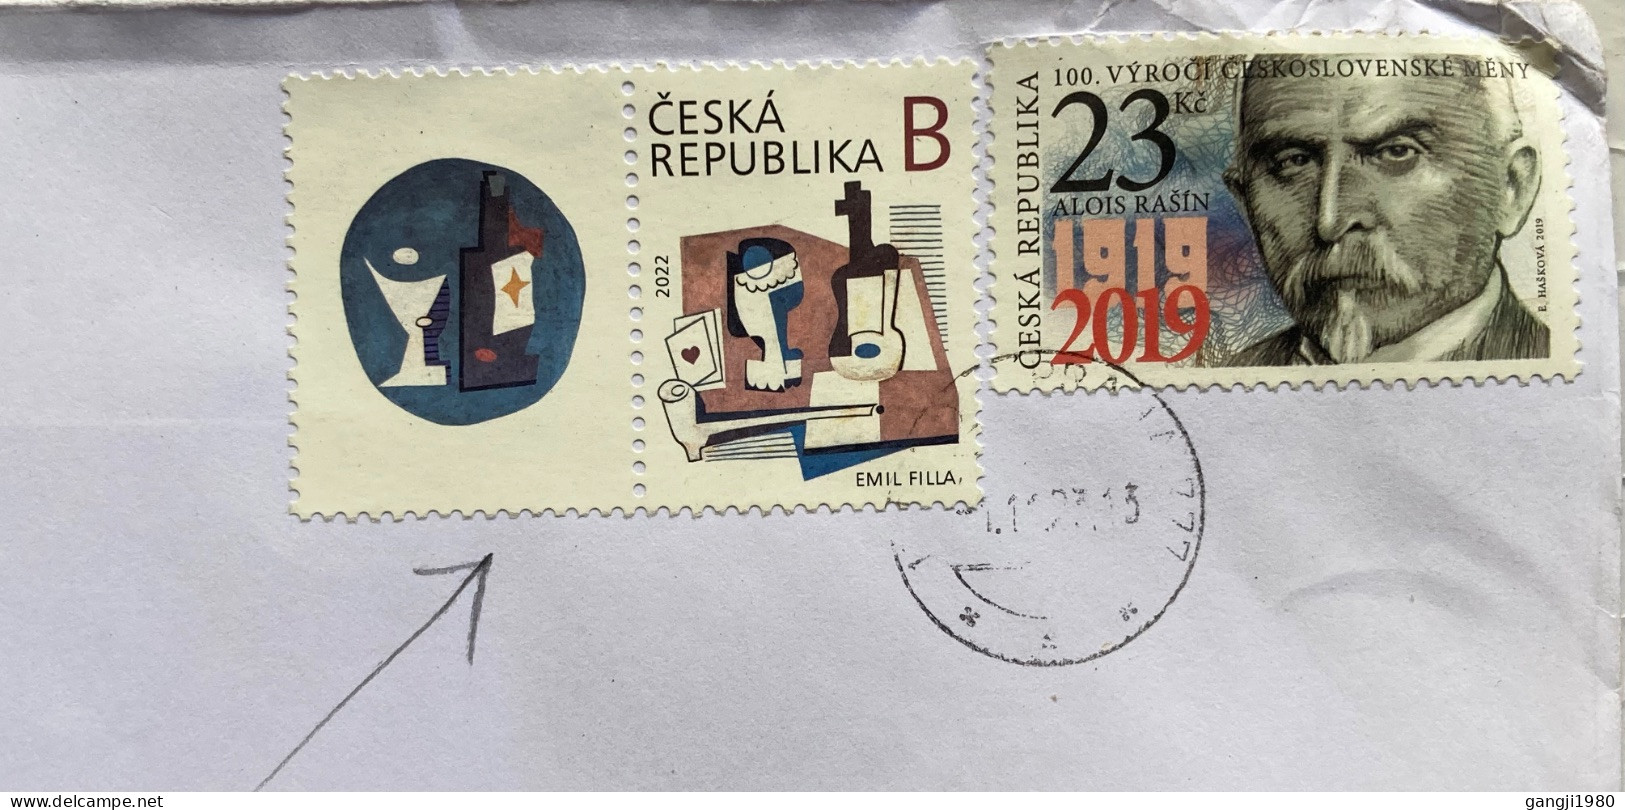 CZECH REPUBLIC 2023, COVER USED TO INDIA, 2022 EMIL PHILA, ART, PAINTING, MUSIC, EXTRA TAB, 2019  ALOIS RASIN FINANCE MI - Covers & Documents